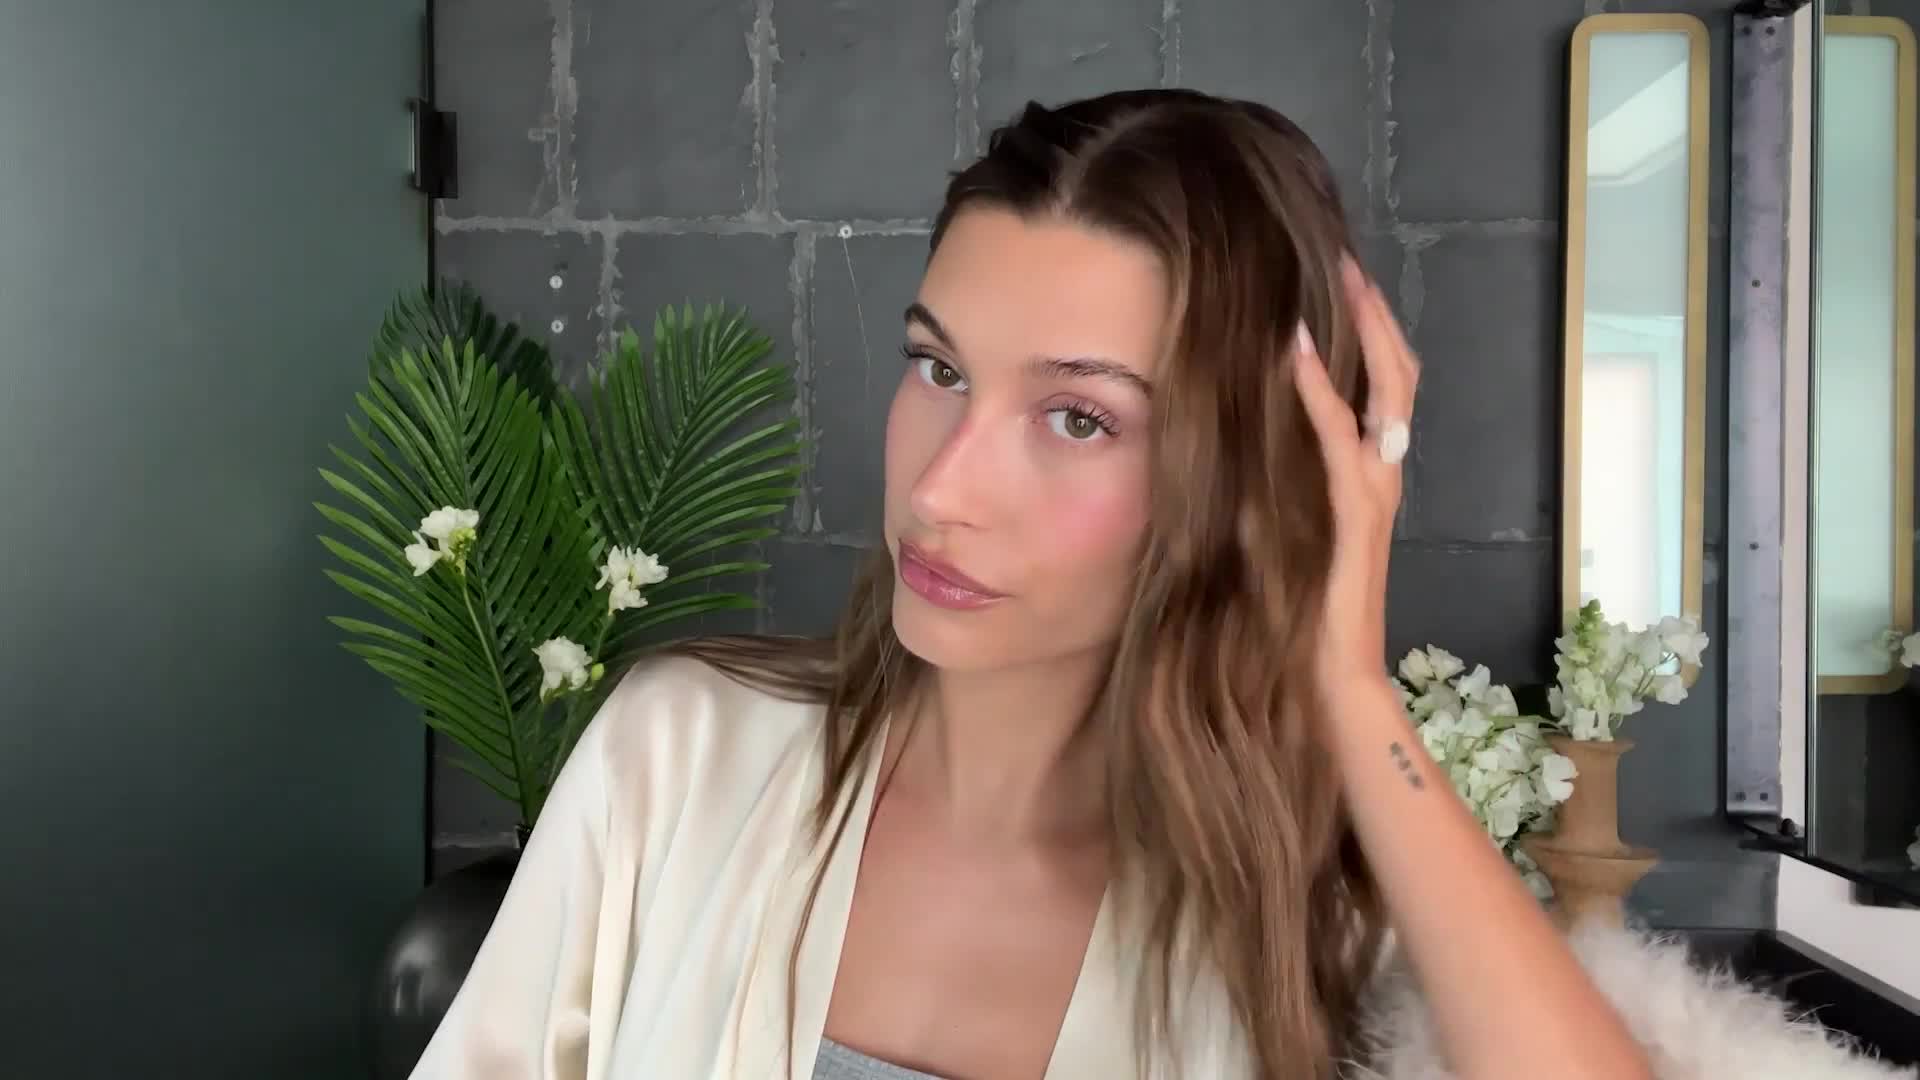 Watch Hailey Bieber On Dewy Skin Care Date Night Makeup And The Launch Of Her Beauty Brand